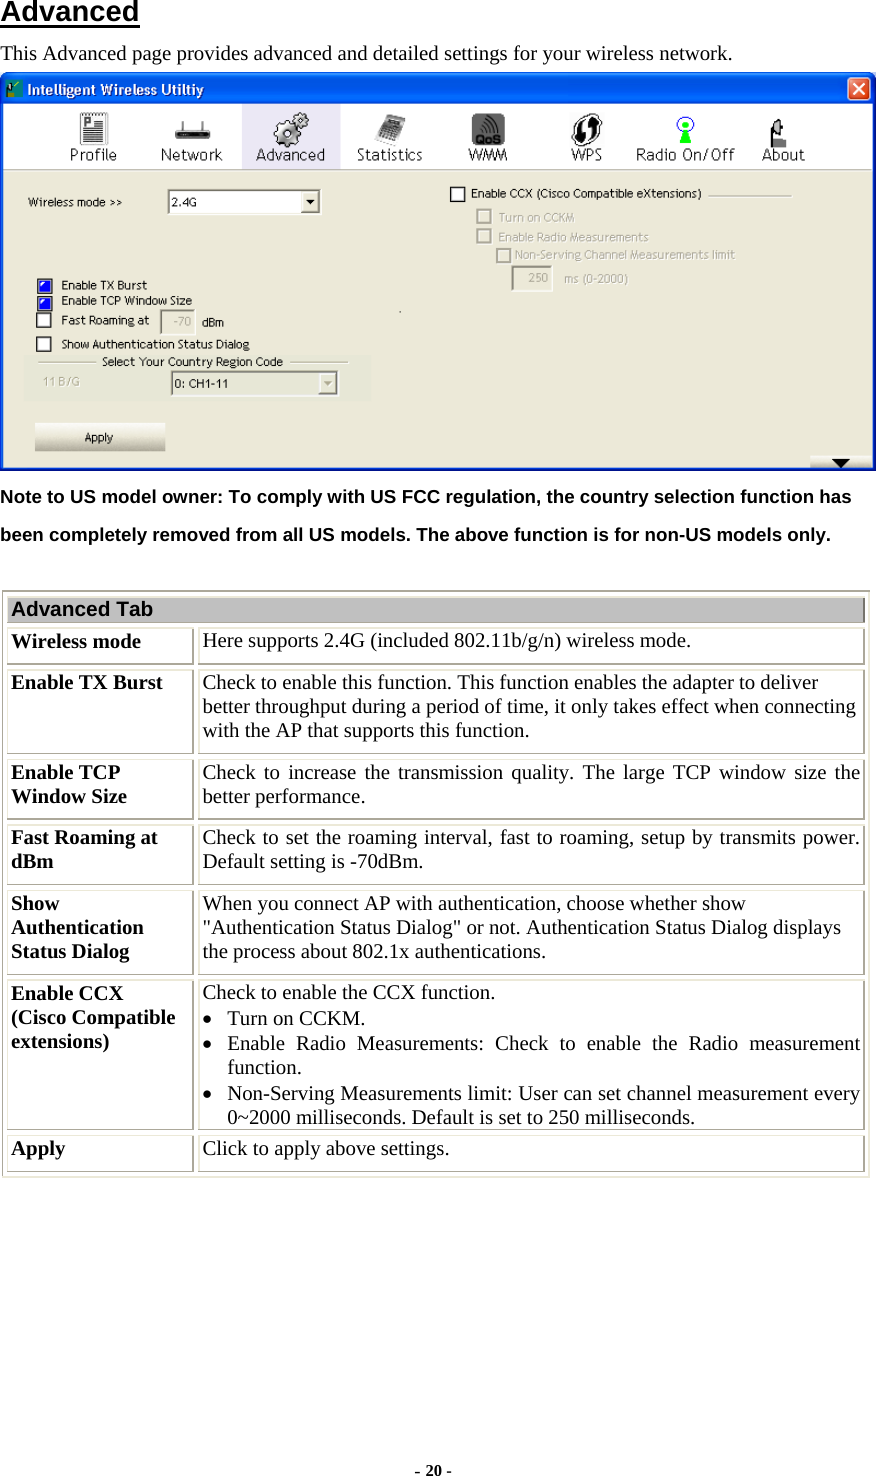    Advanced This Advanced page provides advanced and detailed settings for your wireless network.  Note to US model owner: To comply with US FCC regulation, the country selection function has been completely removed from all US models. The above function is for non-US models only.  Advanced Tab Wireless mode  Here supports 2.4G (included 802.11b/g/n) wireless mode. Enable TX Burst  Check to enable this function. This function enables the adapter to deliver better throughput during a period of time, it only takes effect when connecting with the AP that supports this function. Enable TCP Window Size  Check to increase the transmission quality. The large TCP window size the better performance. Fast Roaming at dBm  Check to set the roaming interval, fast to roaming, setup by transmits power. Default setting is -70dBm. Show Authentication Status Dialog When you connect AP with authentication, choose whether show &quot;Authentication Status Dialog&quot; or not. Authentication Status Dialog displays the process about 802.1x authentications. Enable CCX   (Cisco Compatible extensions) Check to enable the CCX function.     • Turn on CCKM. • Enable Radio Measurements: Check to enable the Radio measurement function. • Non-Serving Measurements limit: User can set channel measurement every 0~2000 milliseconds. Default is set to 250 milliseconds. Apply  Click to apply above settings.    - 20 - 